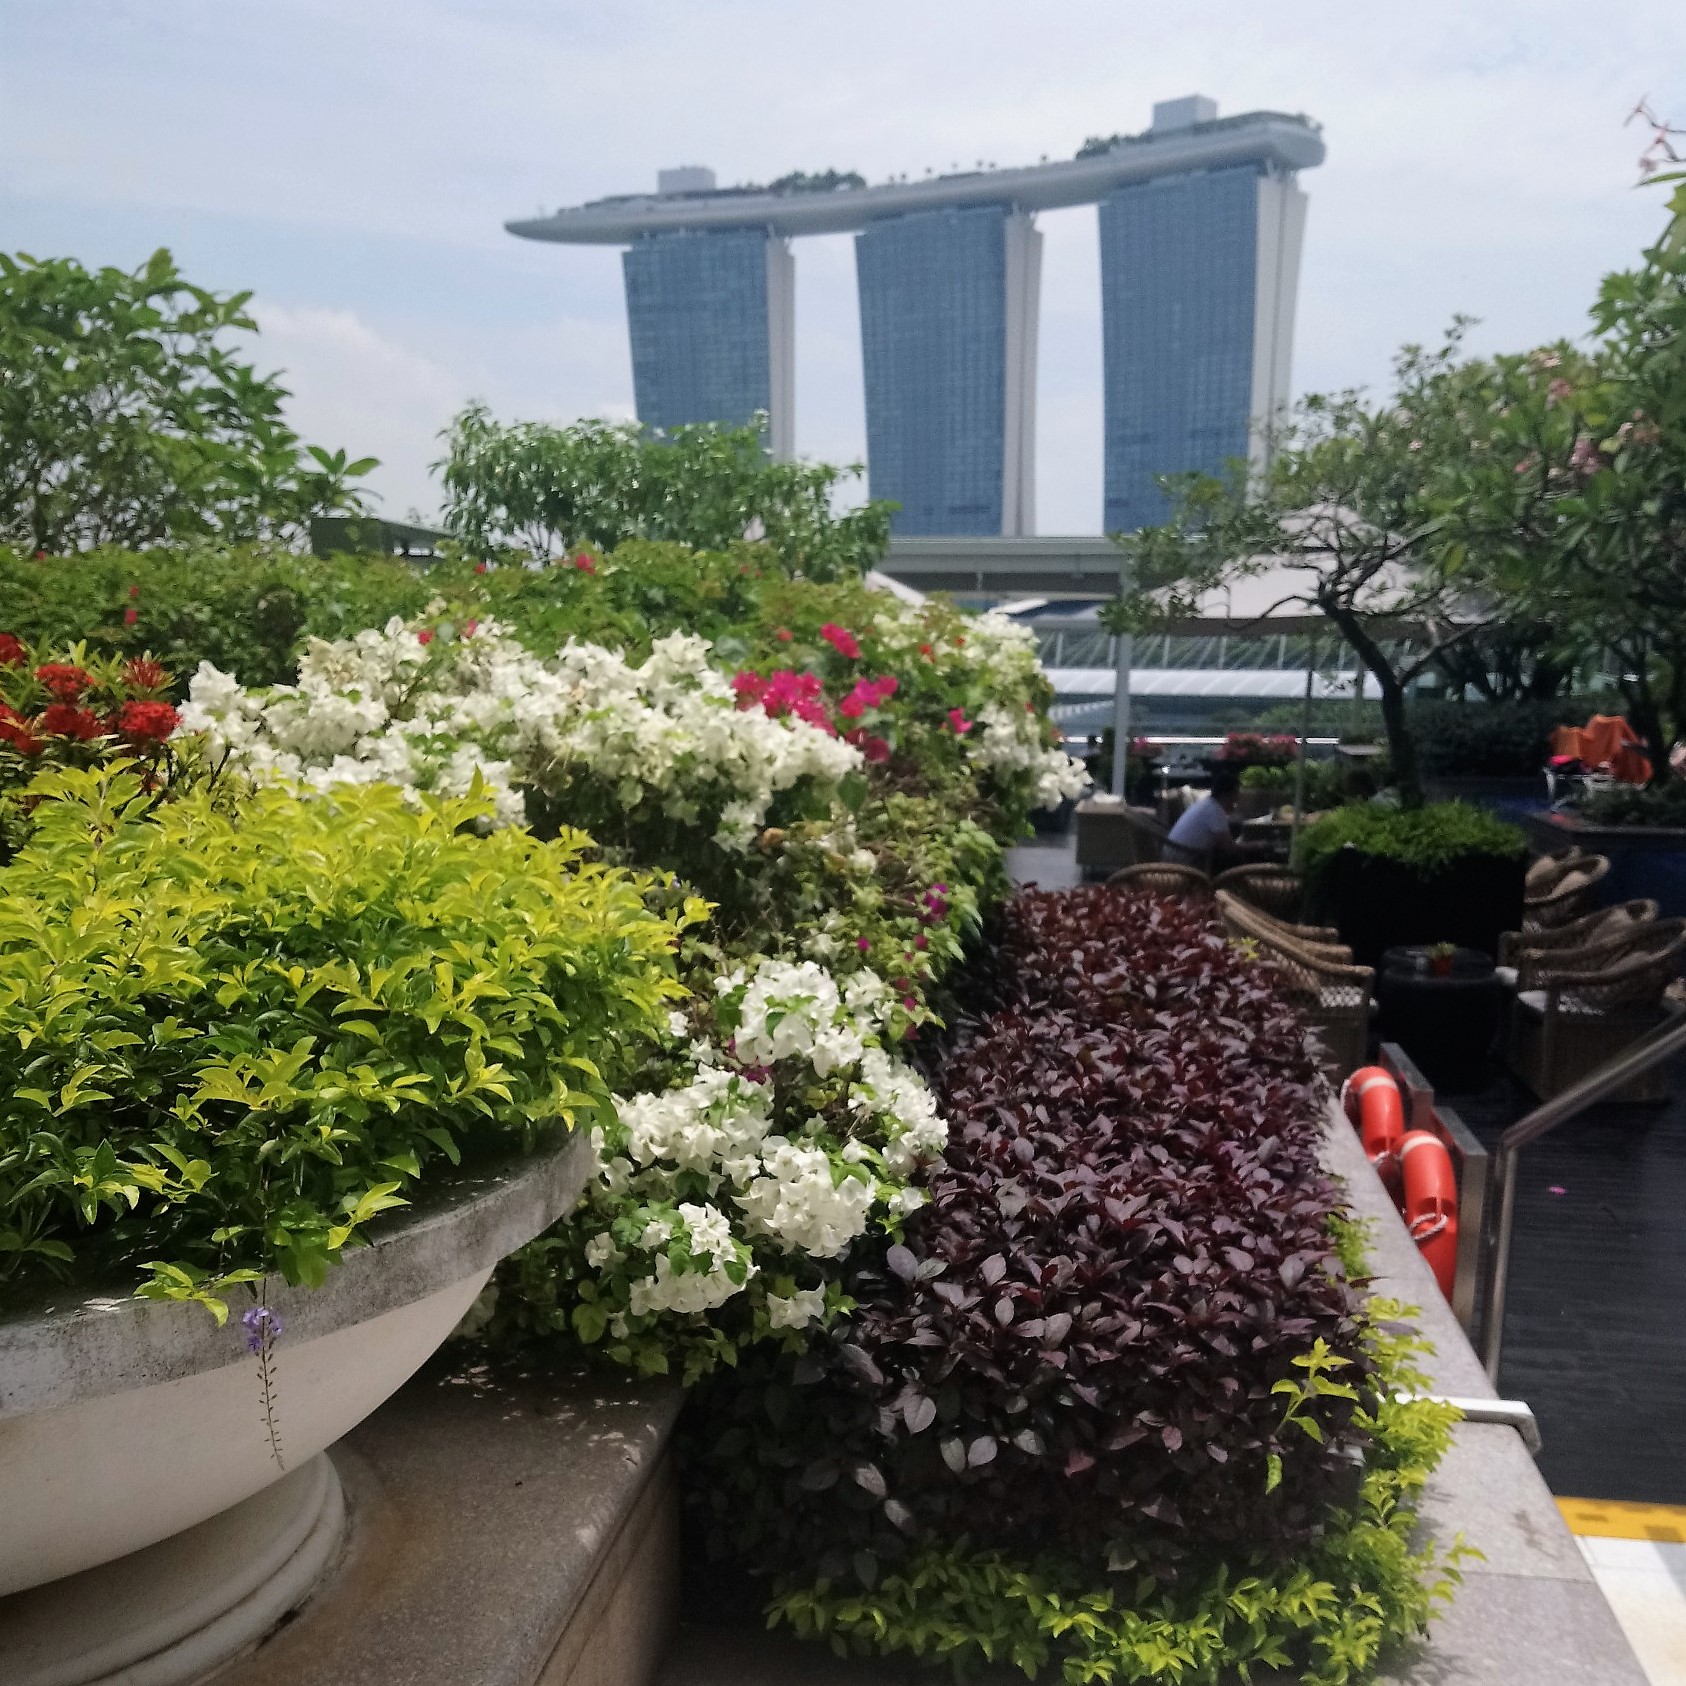 View of Marina Bay Sands from the rooftop gardens at The Fullerton Bay Hotel Singapore